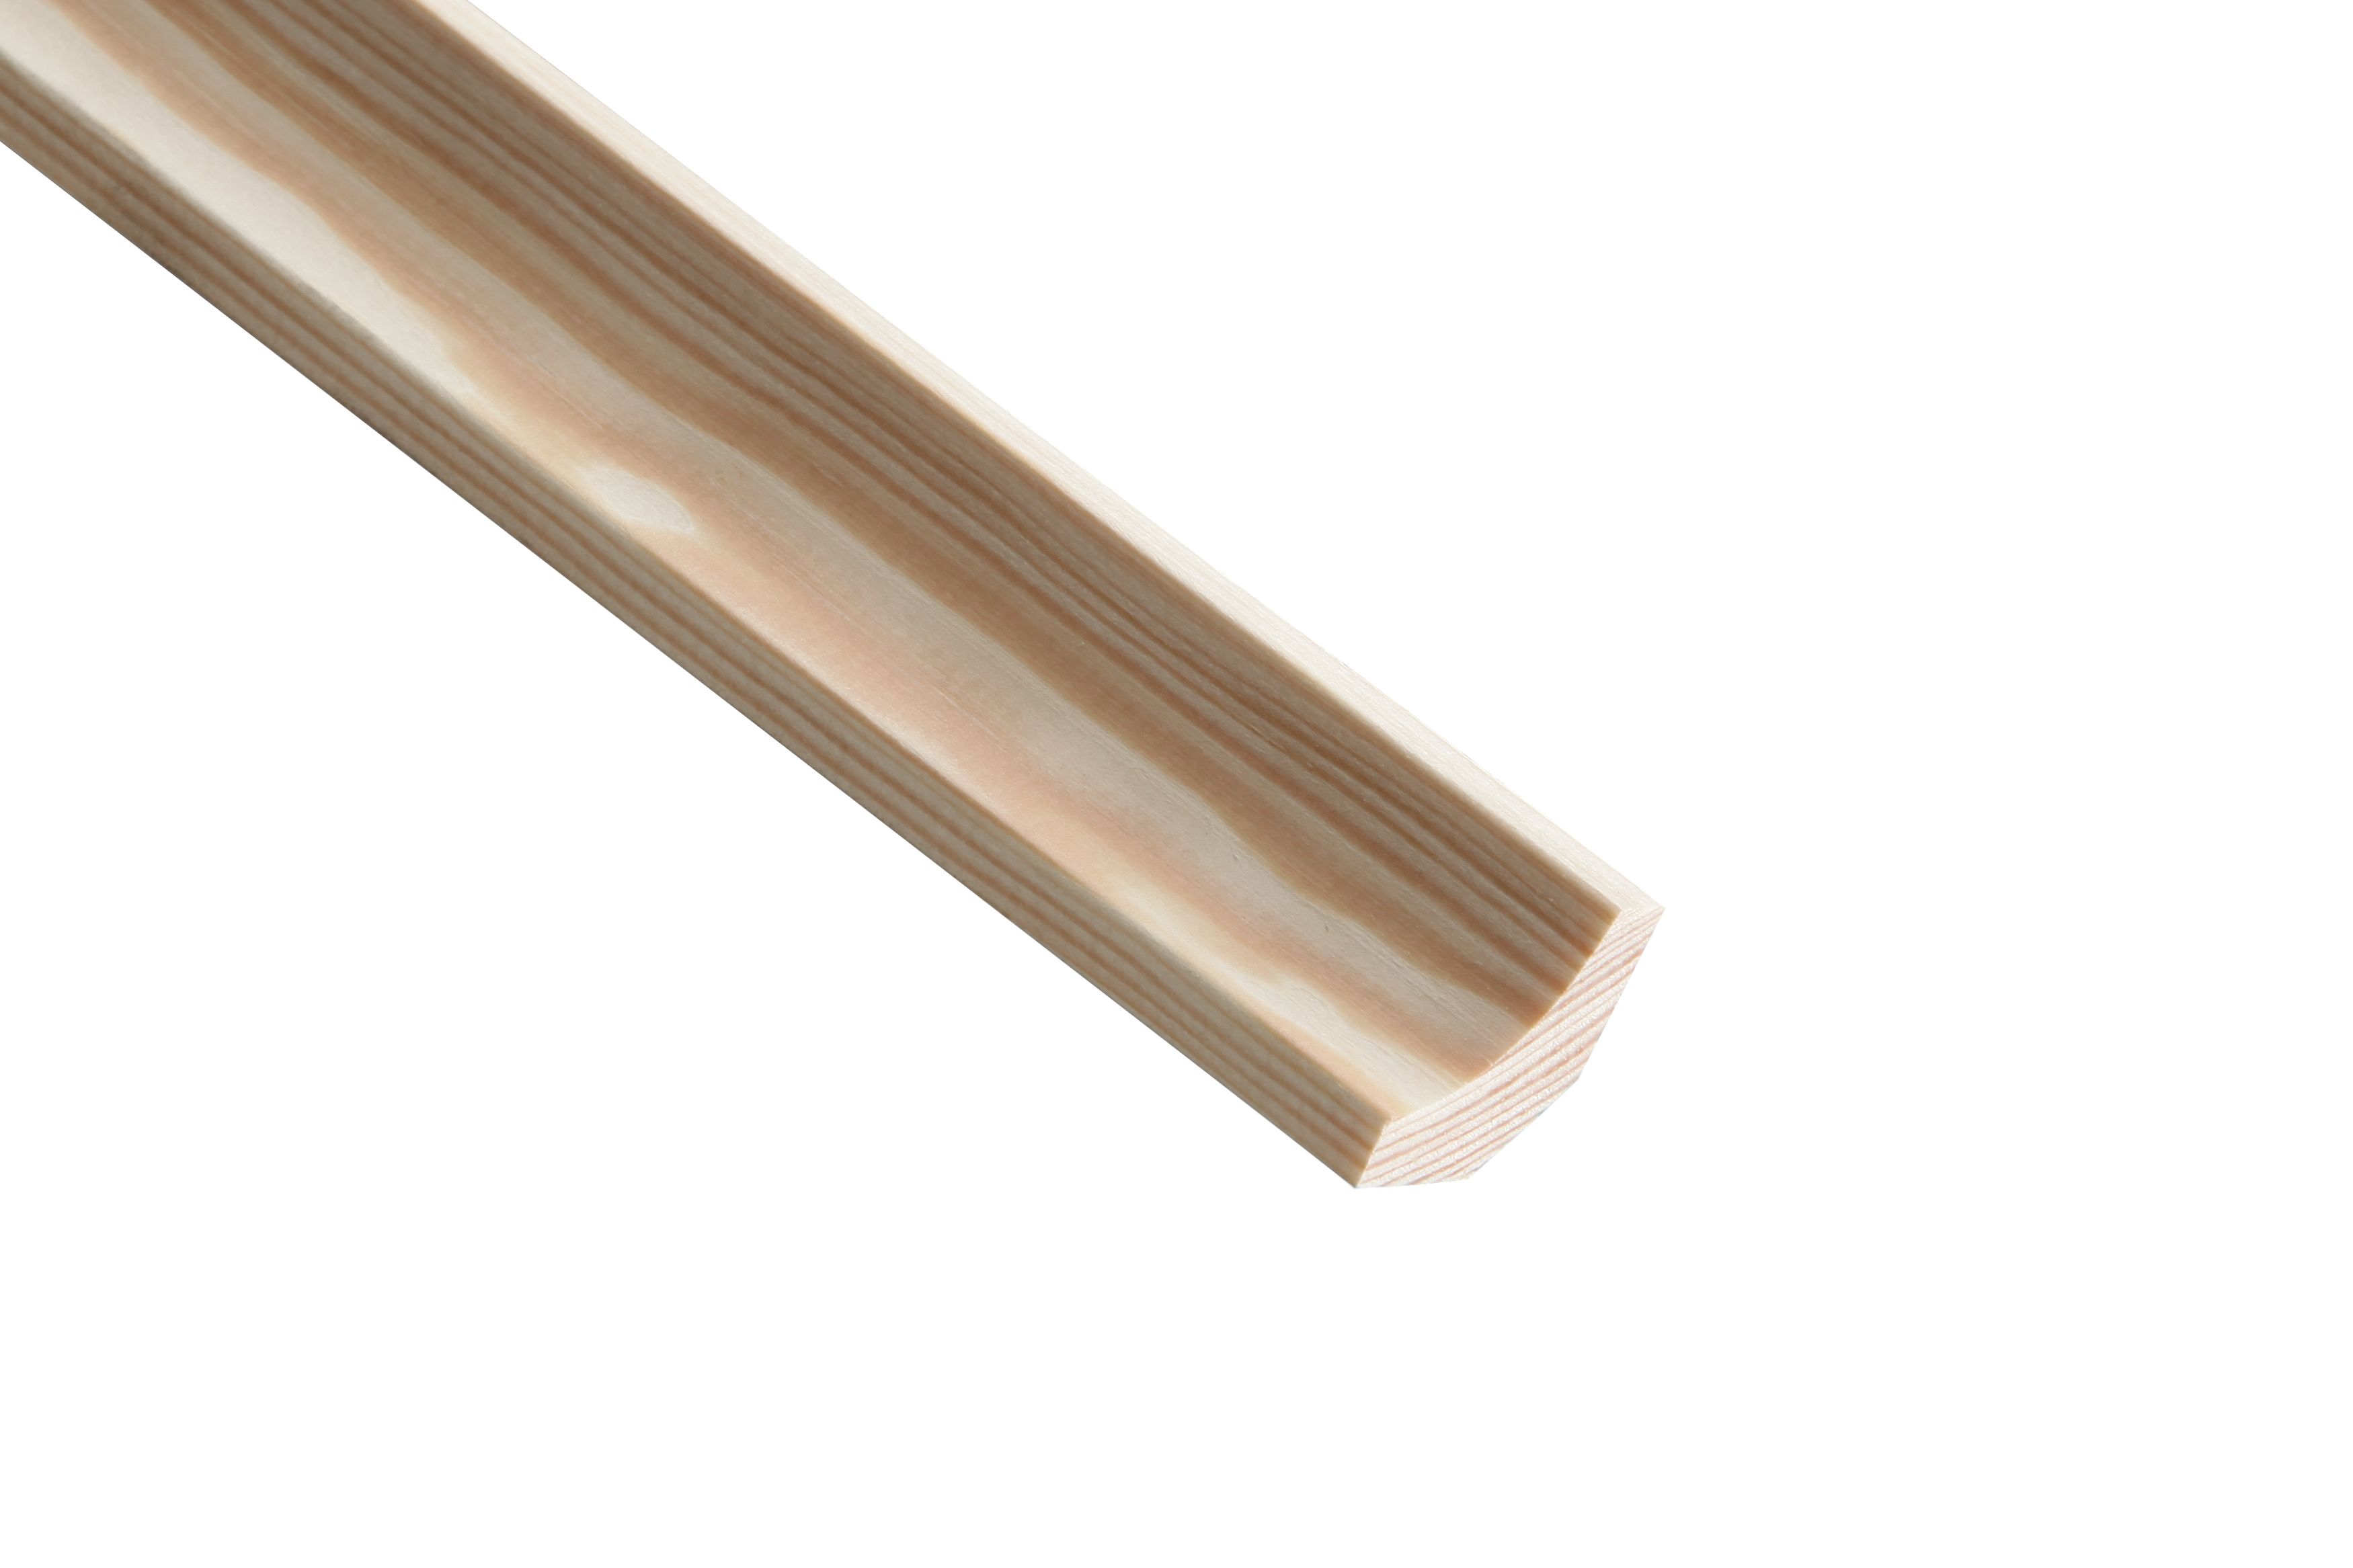 Image of Wickes Pine Scotia Moulding - 21 x 21 x 2400mm